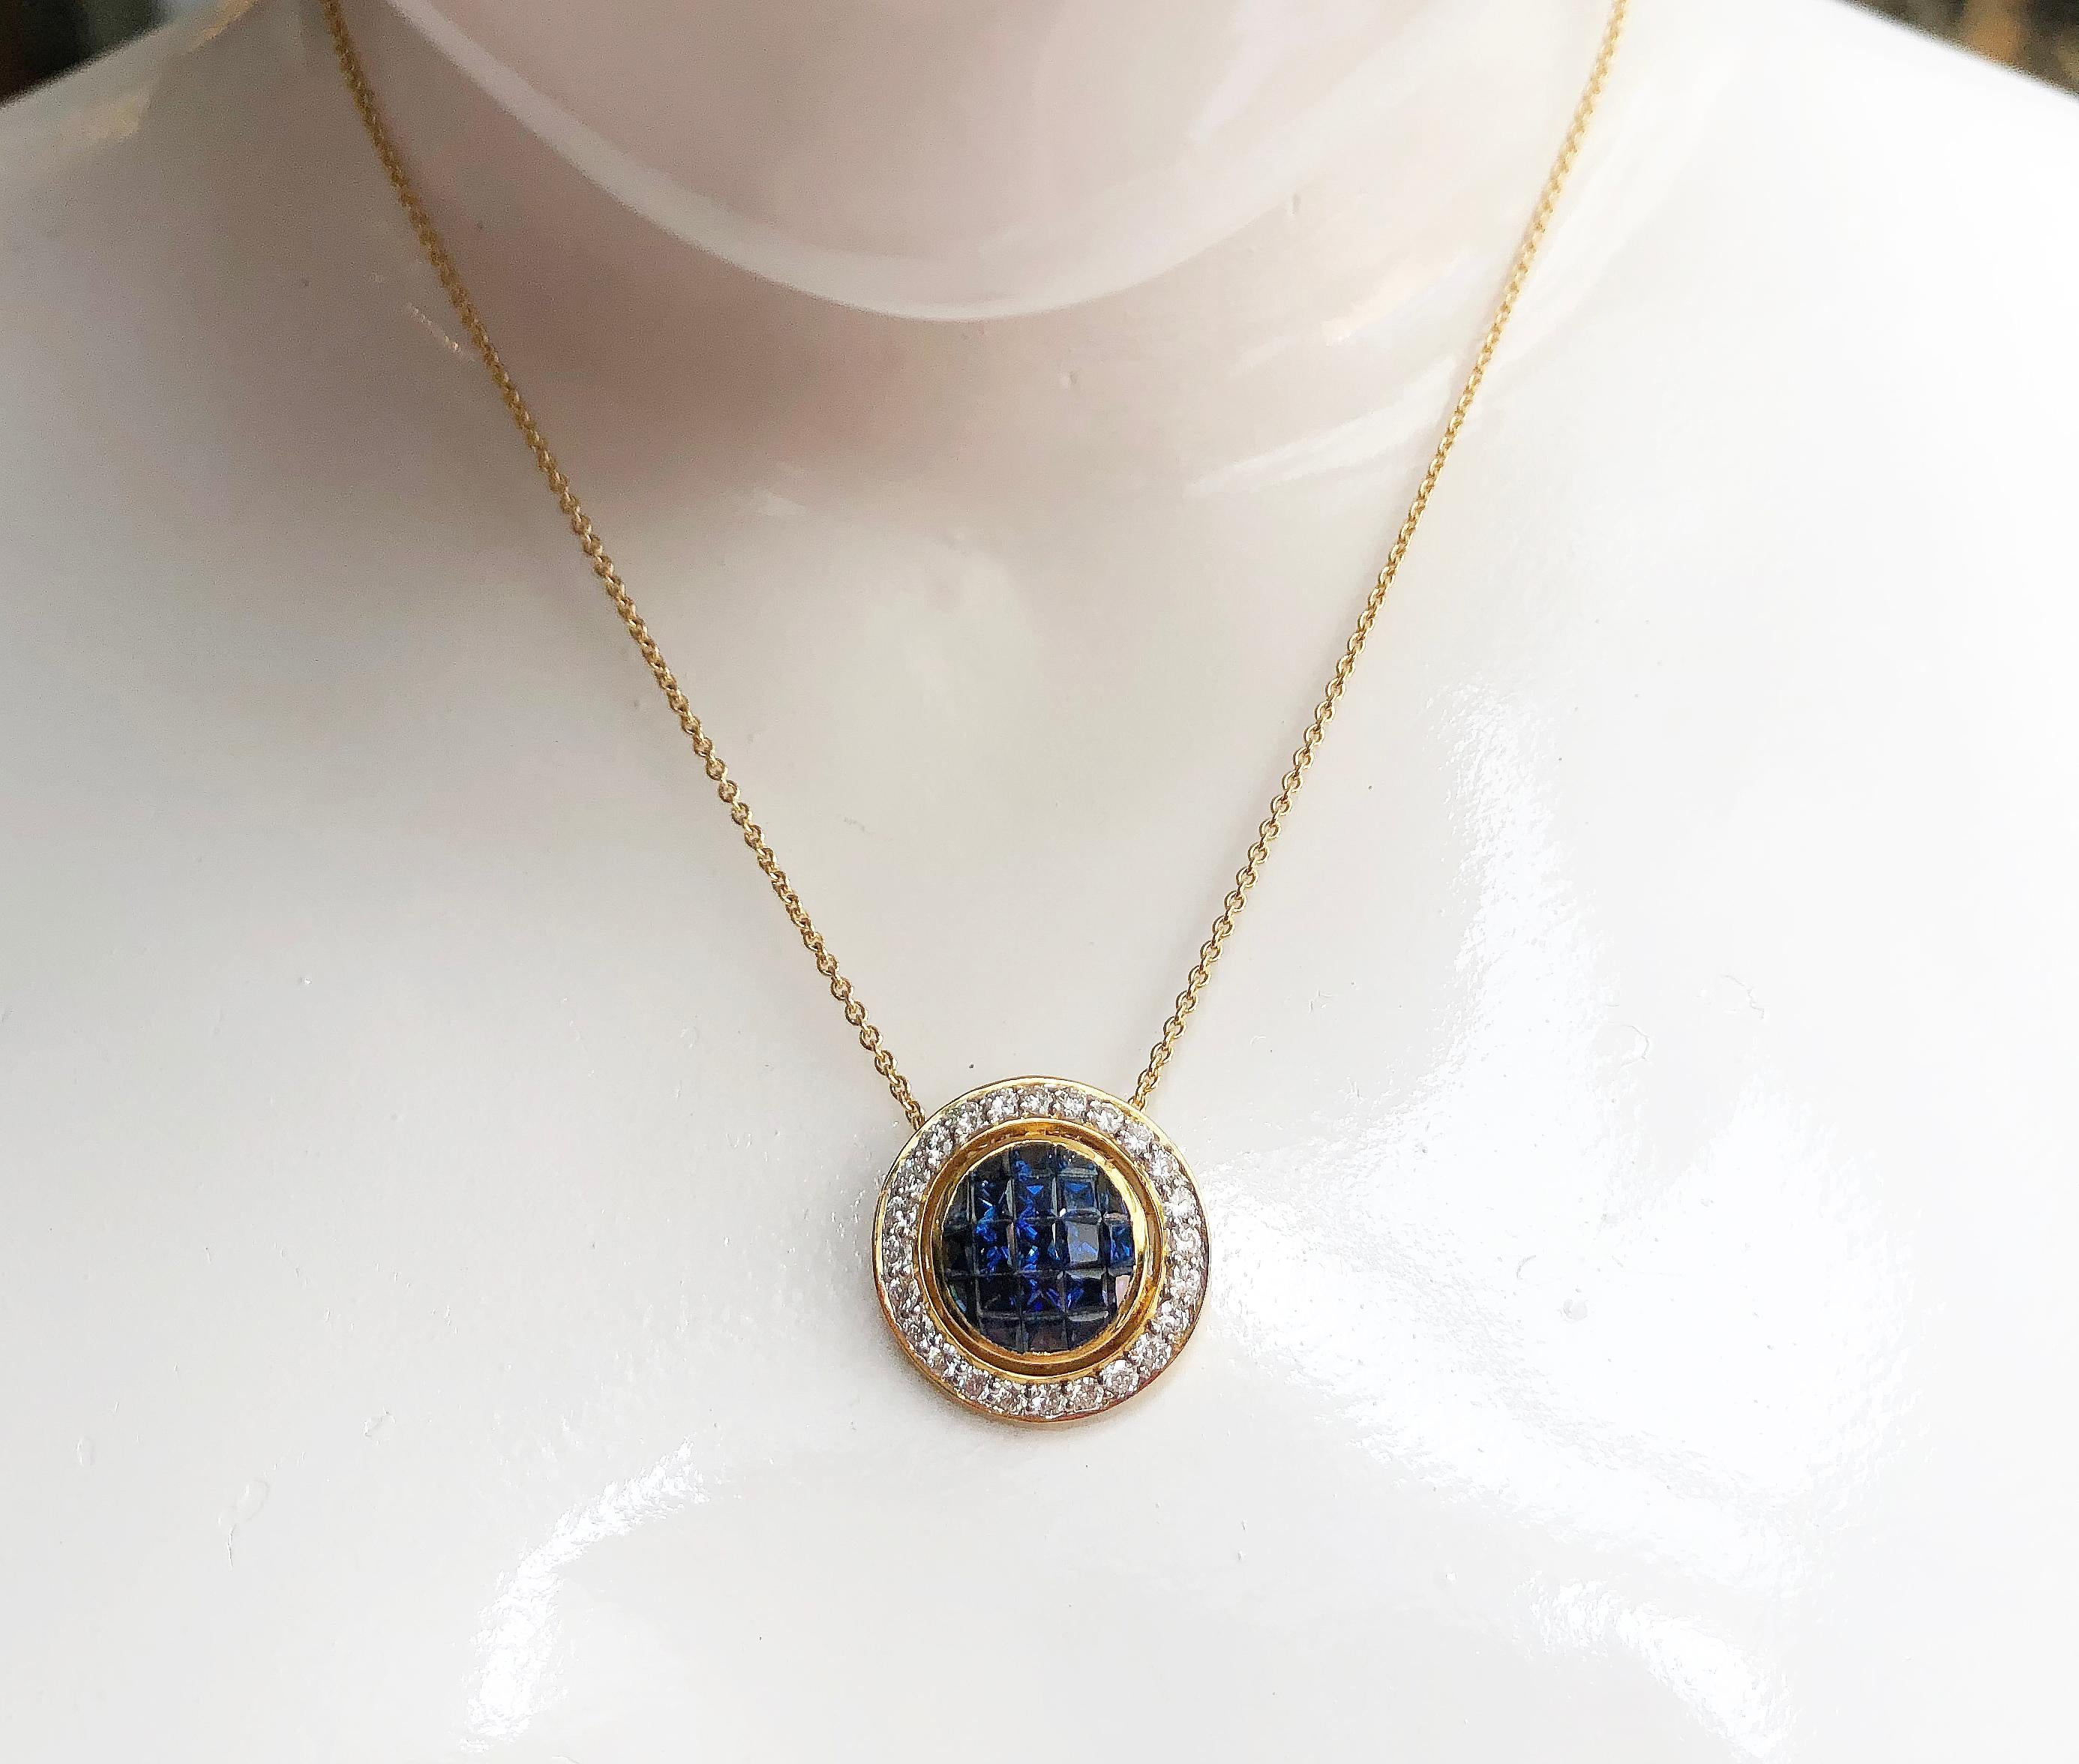 Blue Sapphire 2.70 carats with Diamond 0.78 carat Pendant set in 18 Karat Gold Settings
(chain not included)

Width: 2.0 cm
Length: 2.0 cm 

